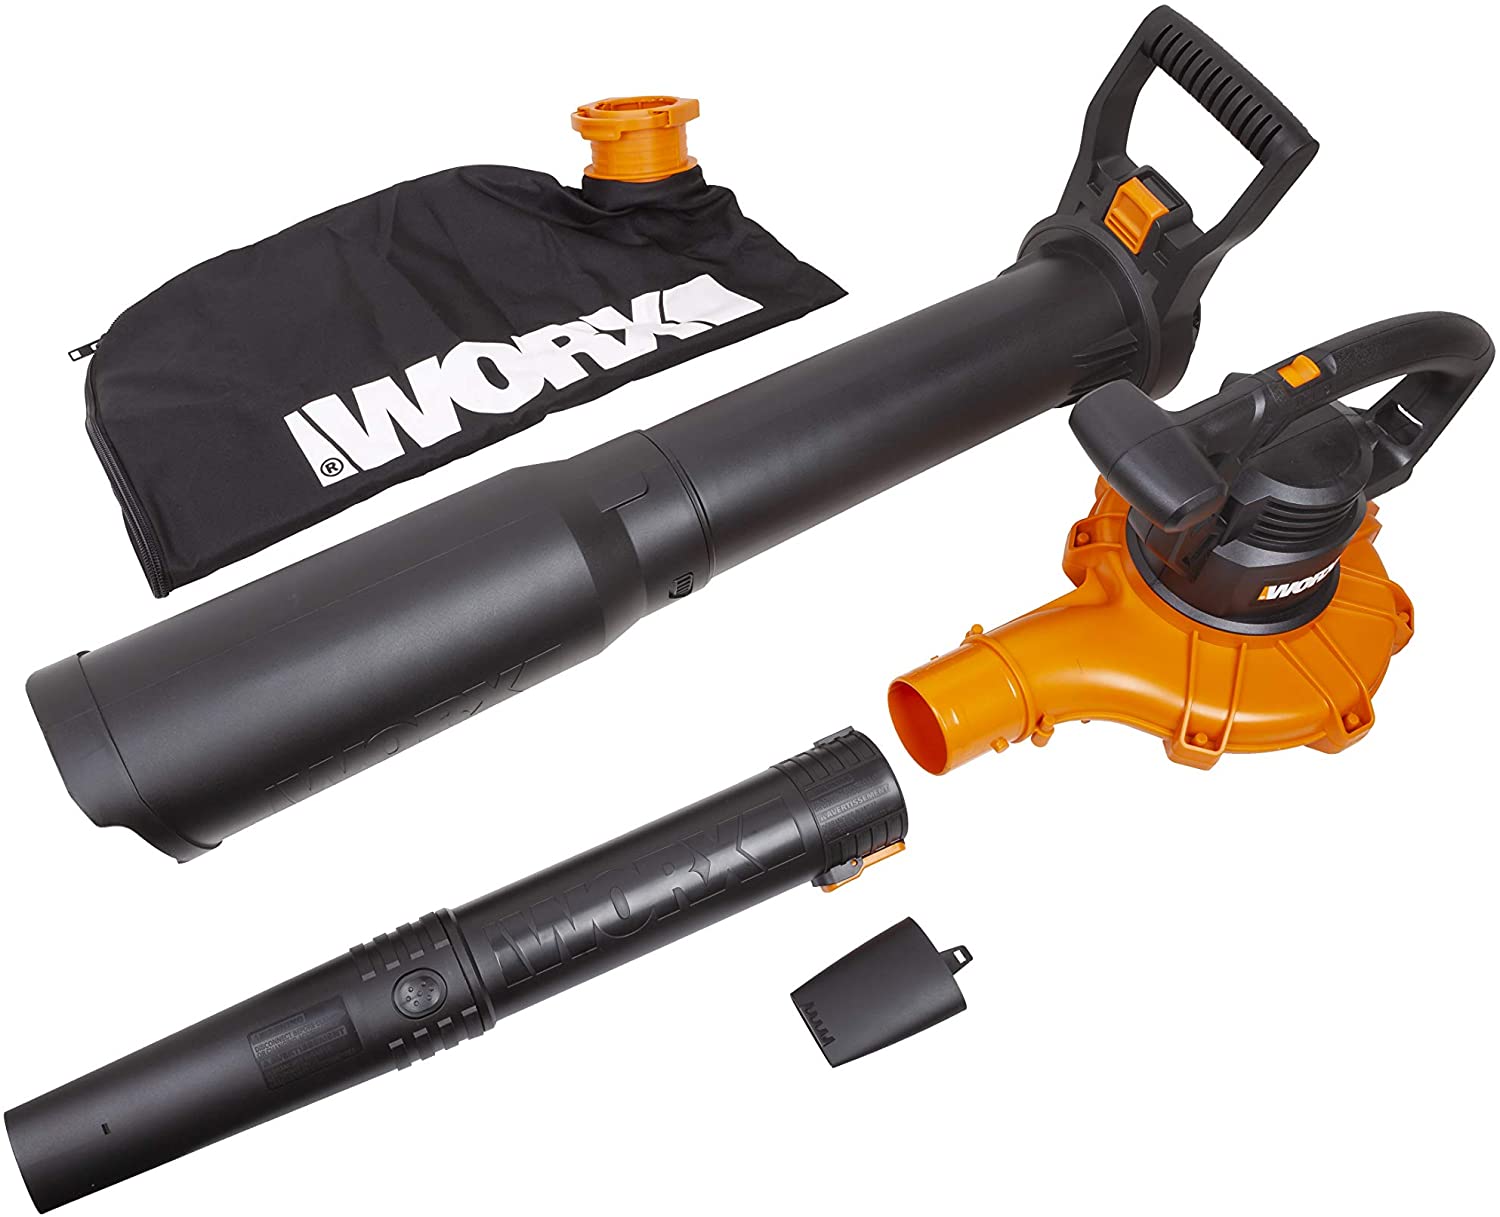 WORX 12-Amp 400-CFM 250-MPH Corded Electric Leaf Blower (Vacuum Kit Included)